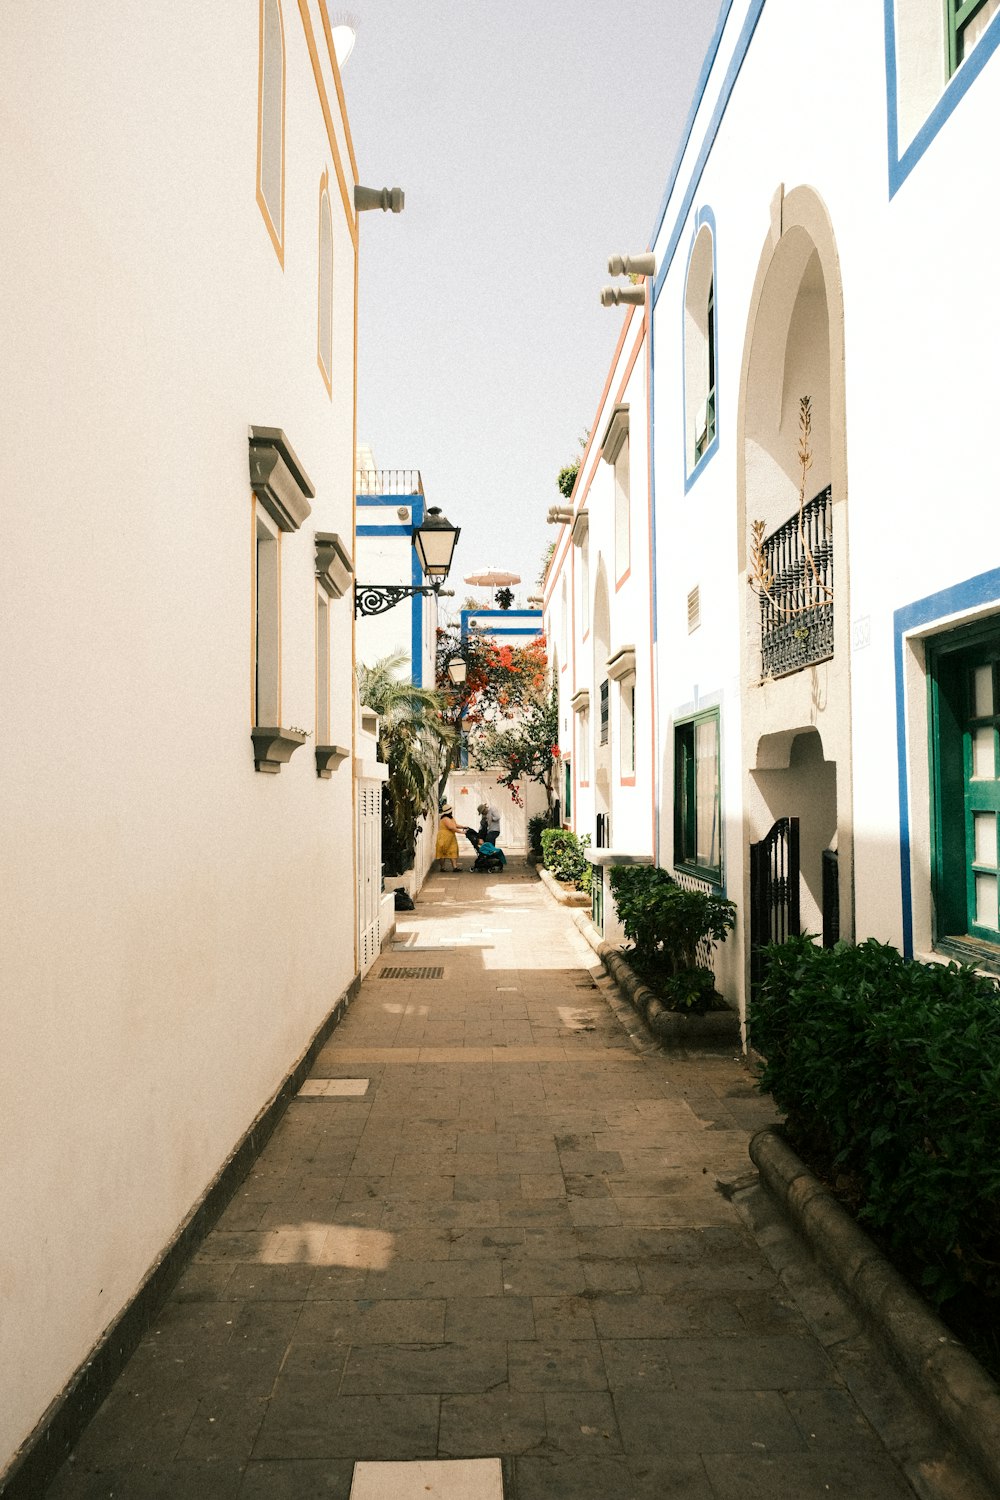 a narrow alley way with white and blue buildings